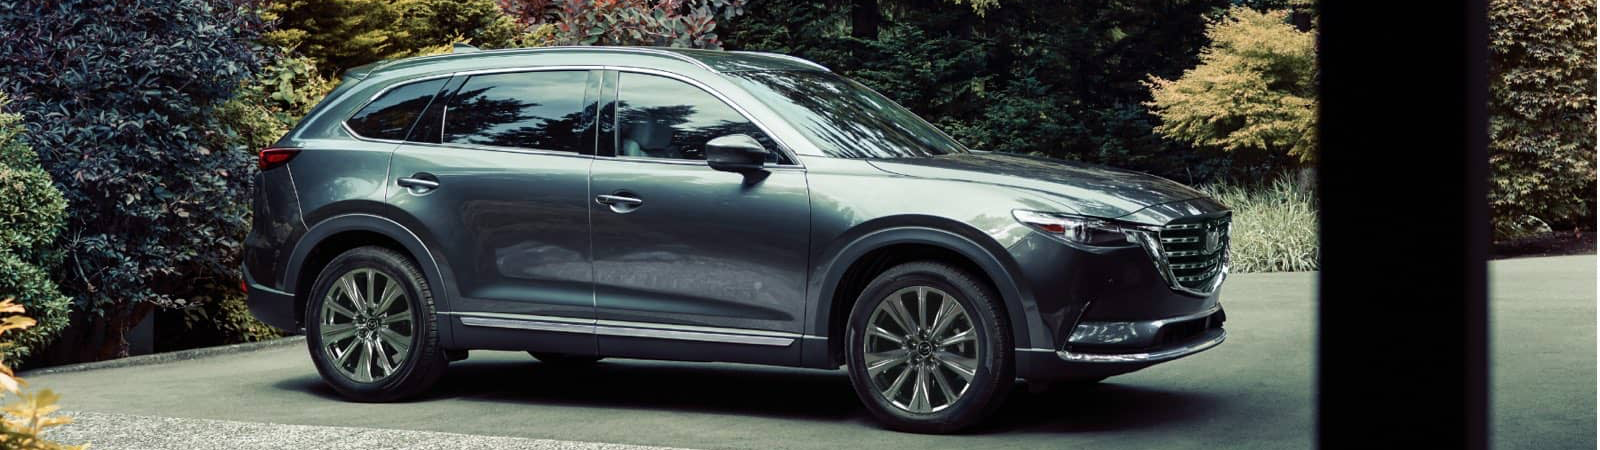 2021-Mazda-CX-5-parked-sideview